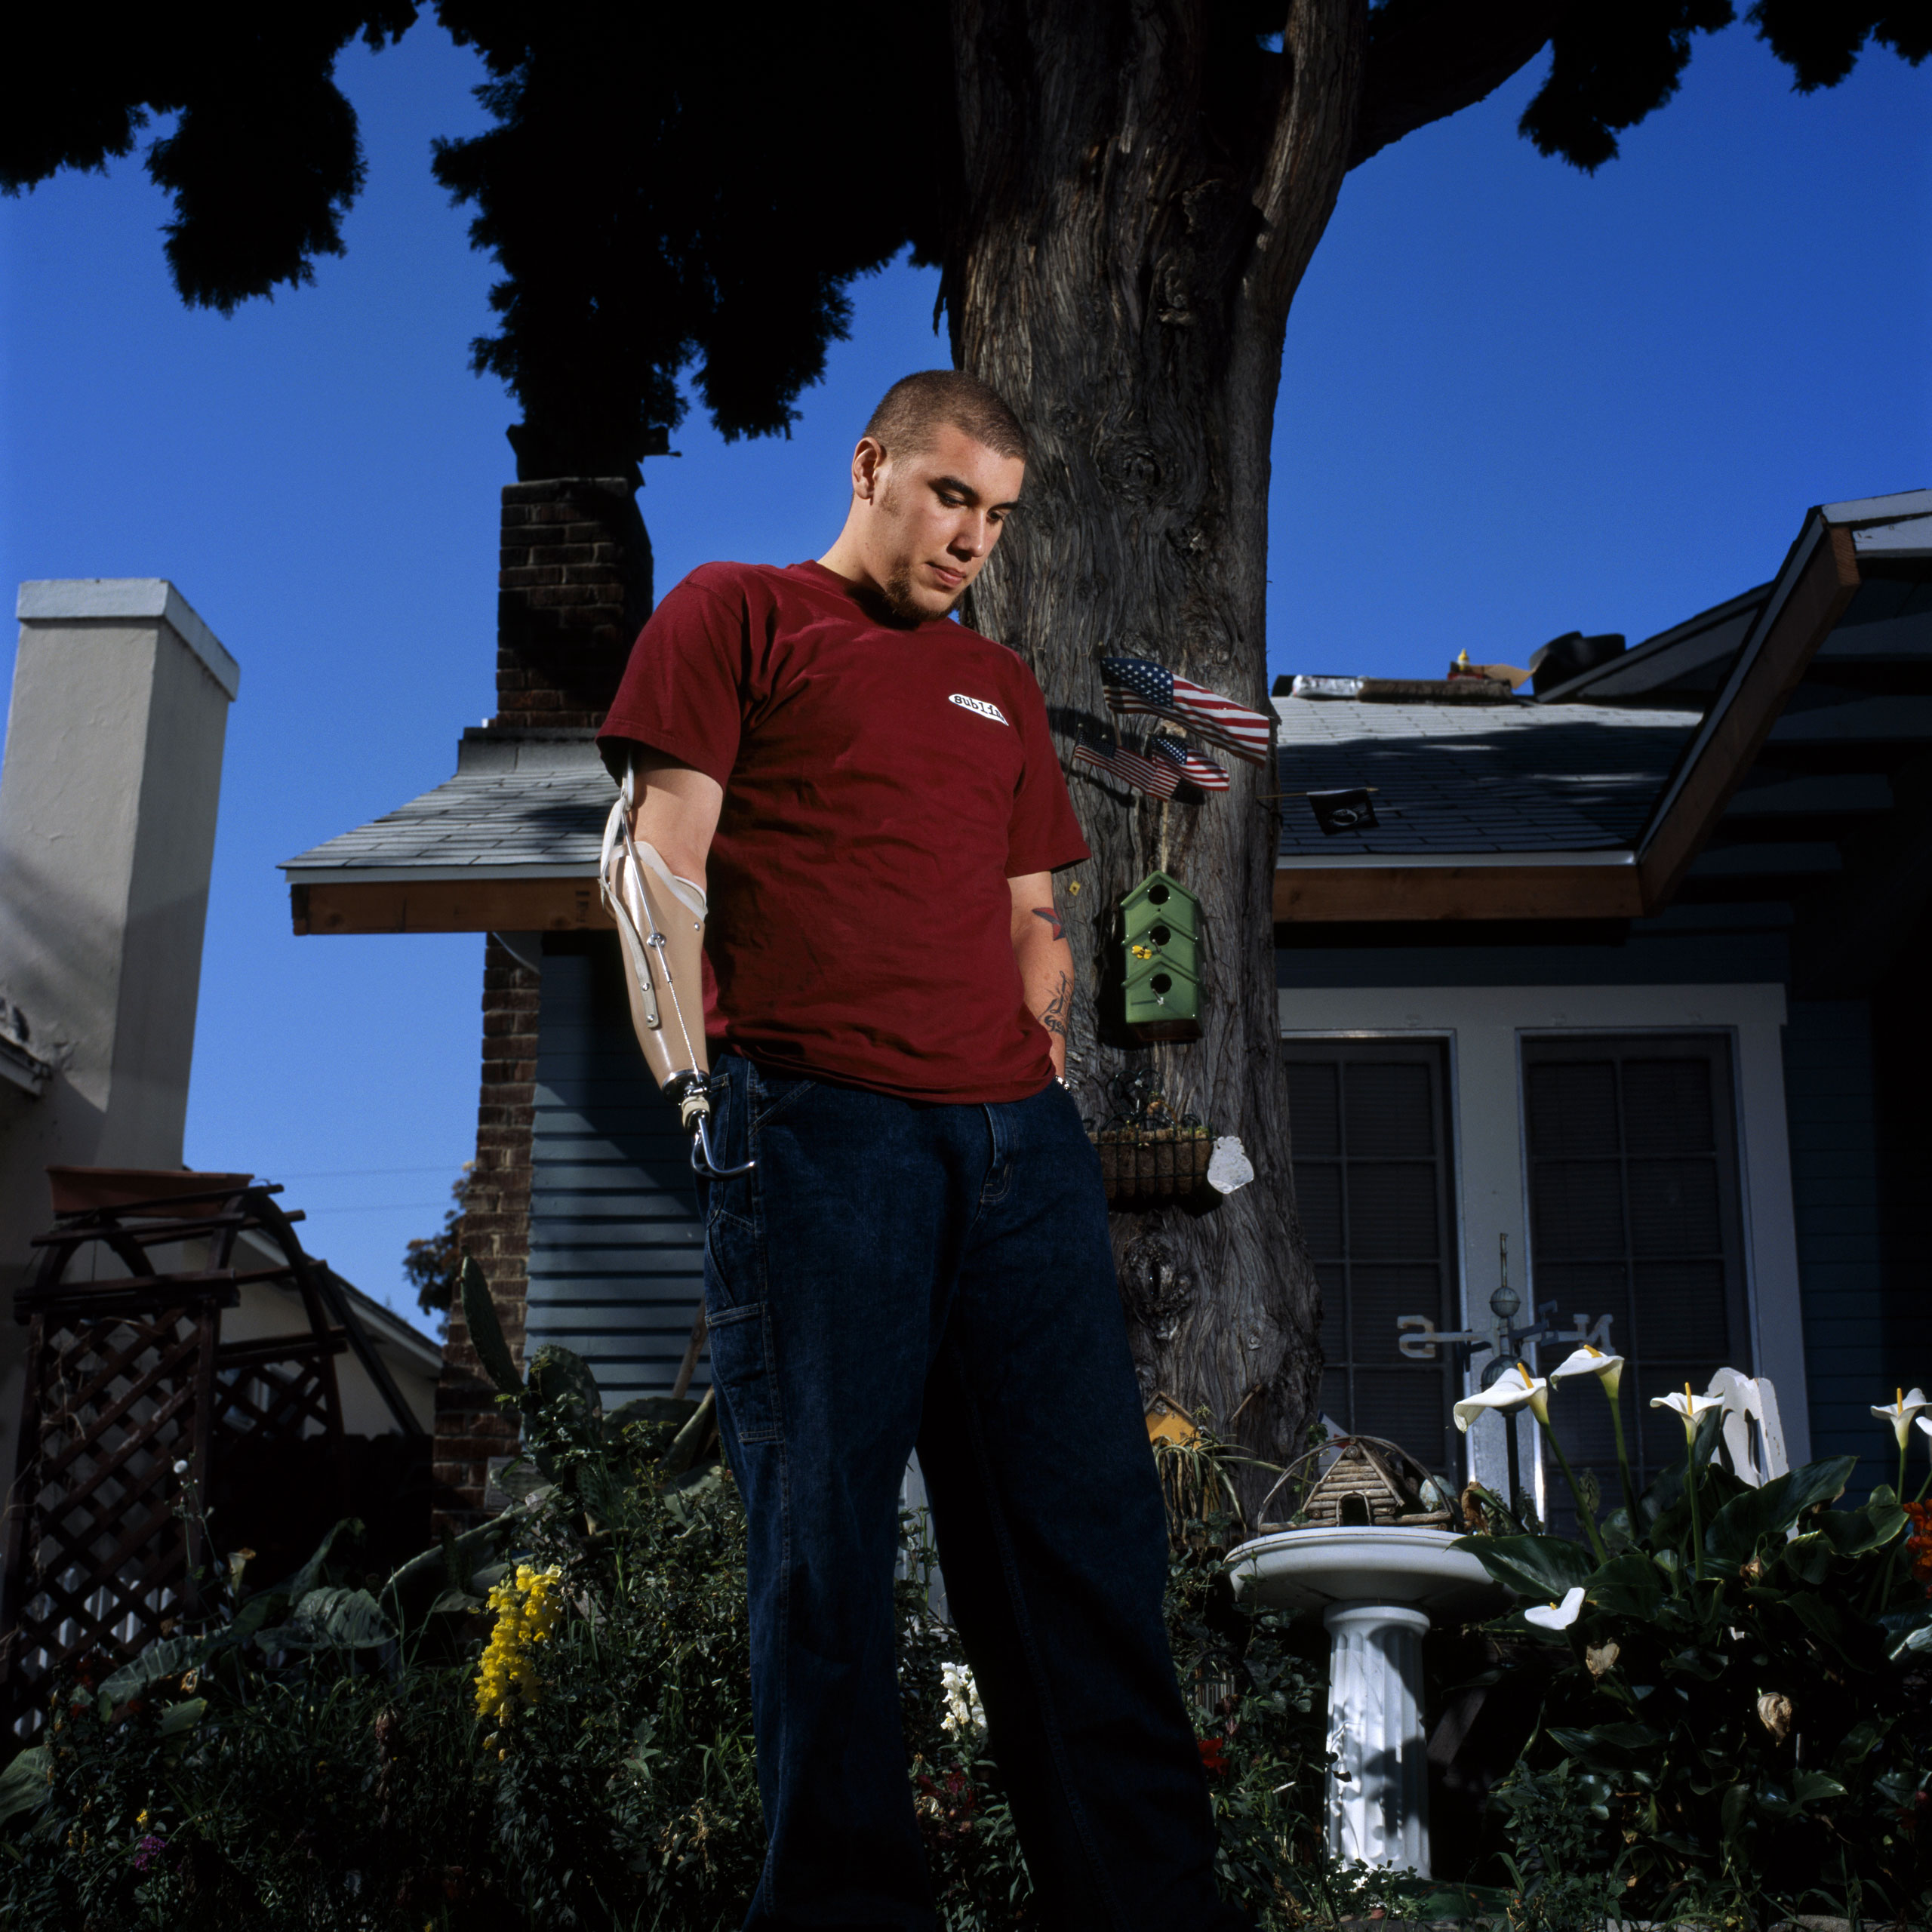 Spc. Robert Acosta, 20, photographed at his home in Santa Ana, Calif., April 13, 2004. Acosta is an ammunition specialist with the 1st Battalion, 501st Regiment, 1st Armored Division. He was a passenger in a Humvee outside Baghdad on July 13, 2003, when an Iraqi teenager threw a grenade into the vehicle. The blast permanently mangled his left leg and ripped off his right arm.